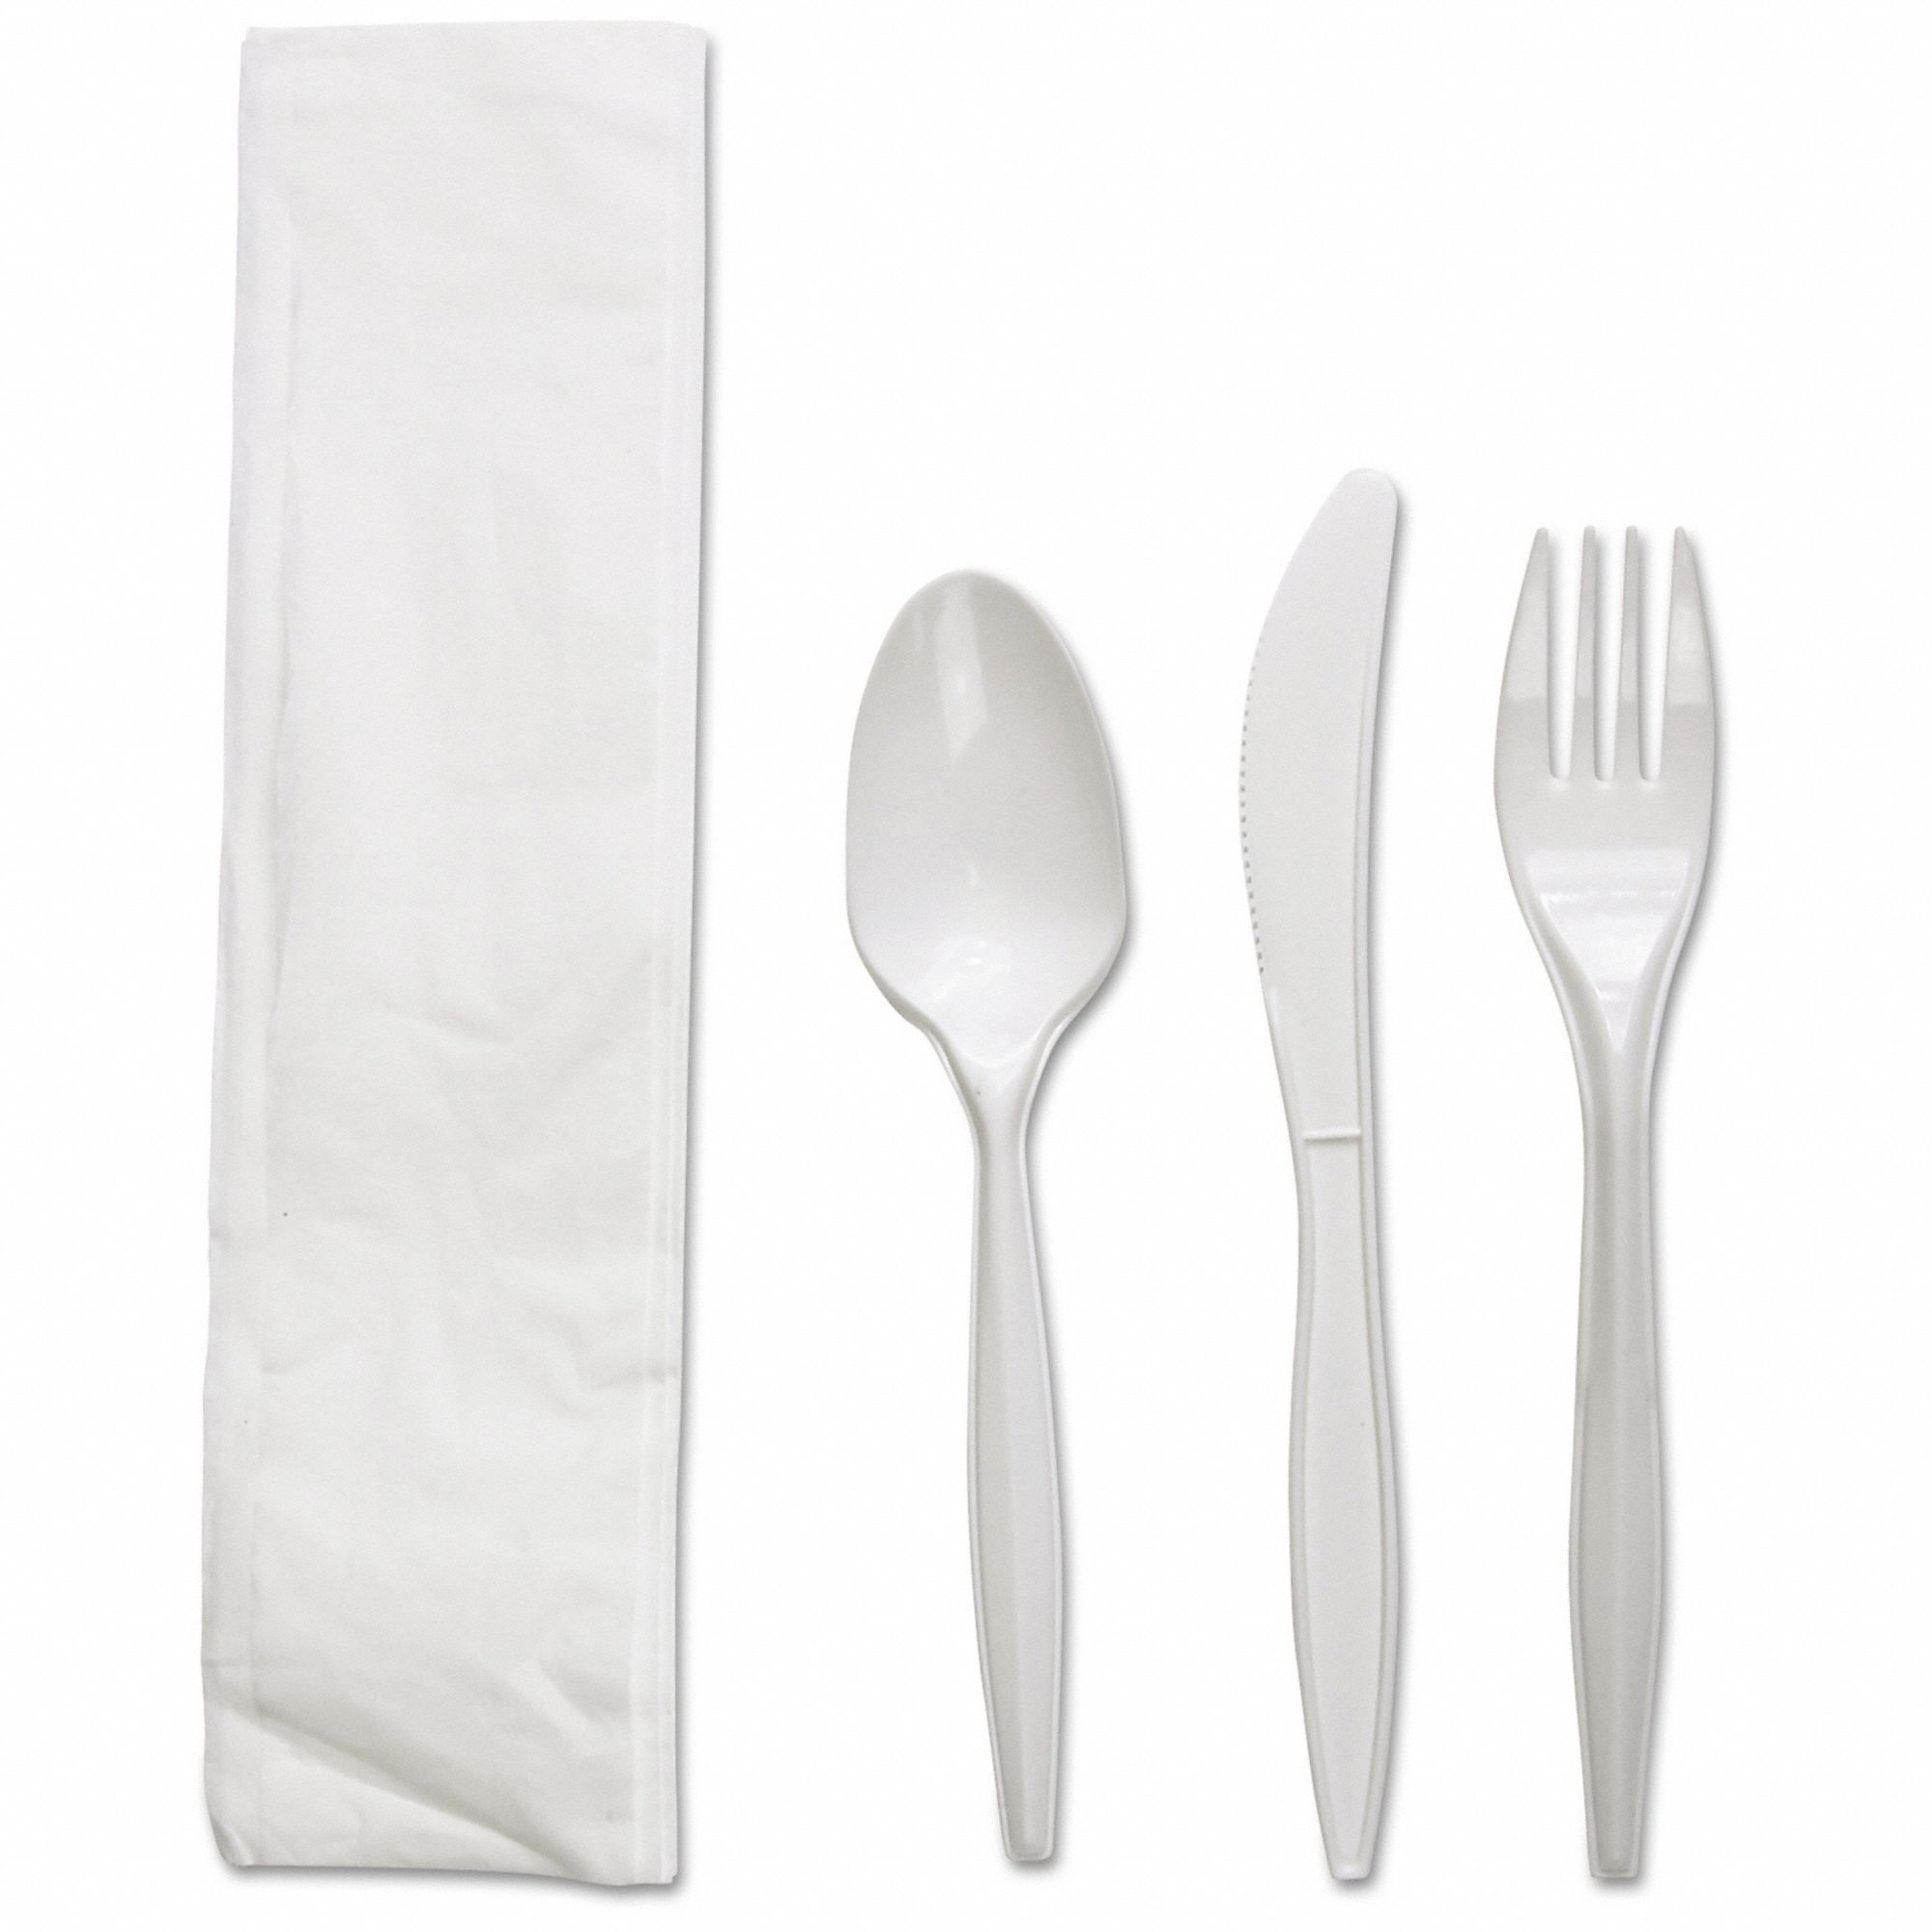 Disposable Cutlery Set: White, Plastic, Wrapped, Fork/Knife/Napkin/Spoon, 250 PK